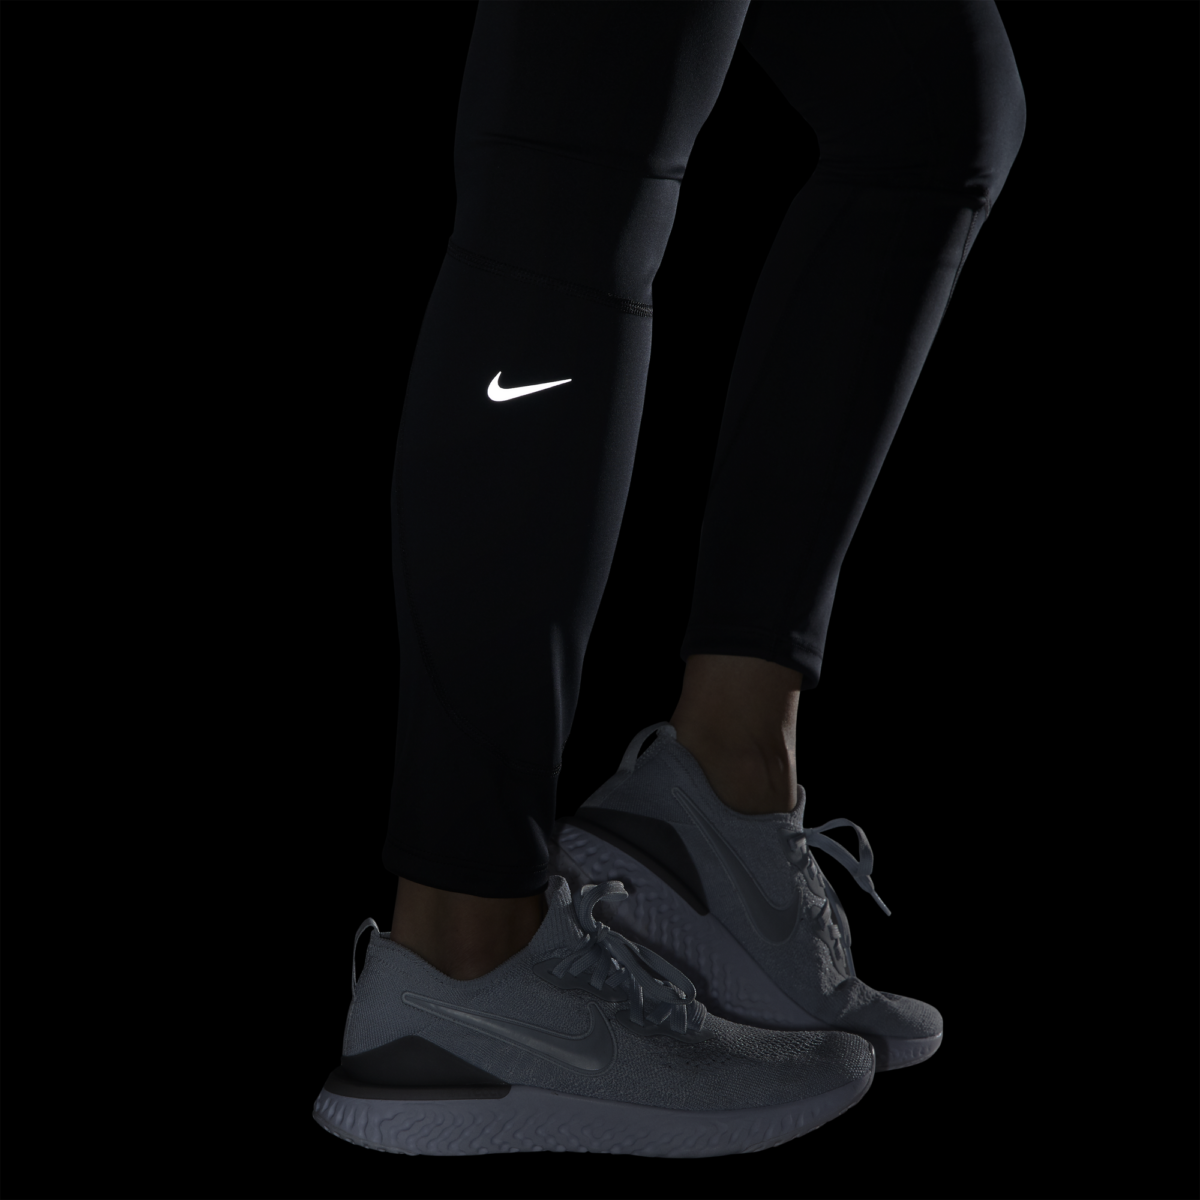 Women's Nike Epic Lux Repel Tight BV4785-010